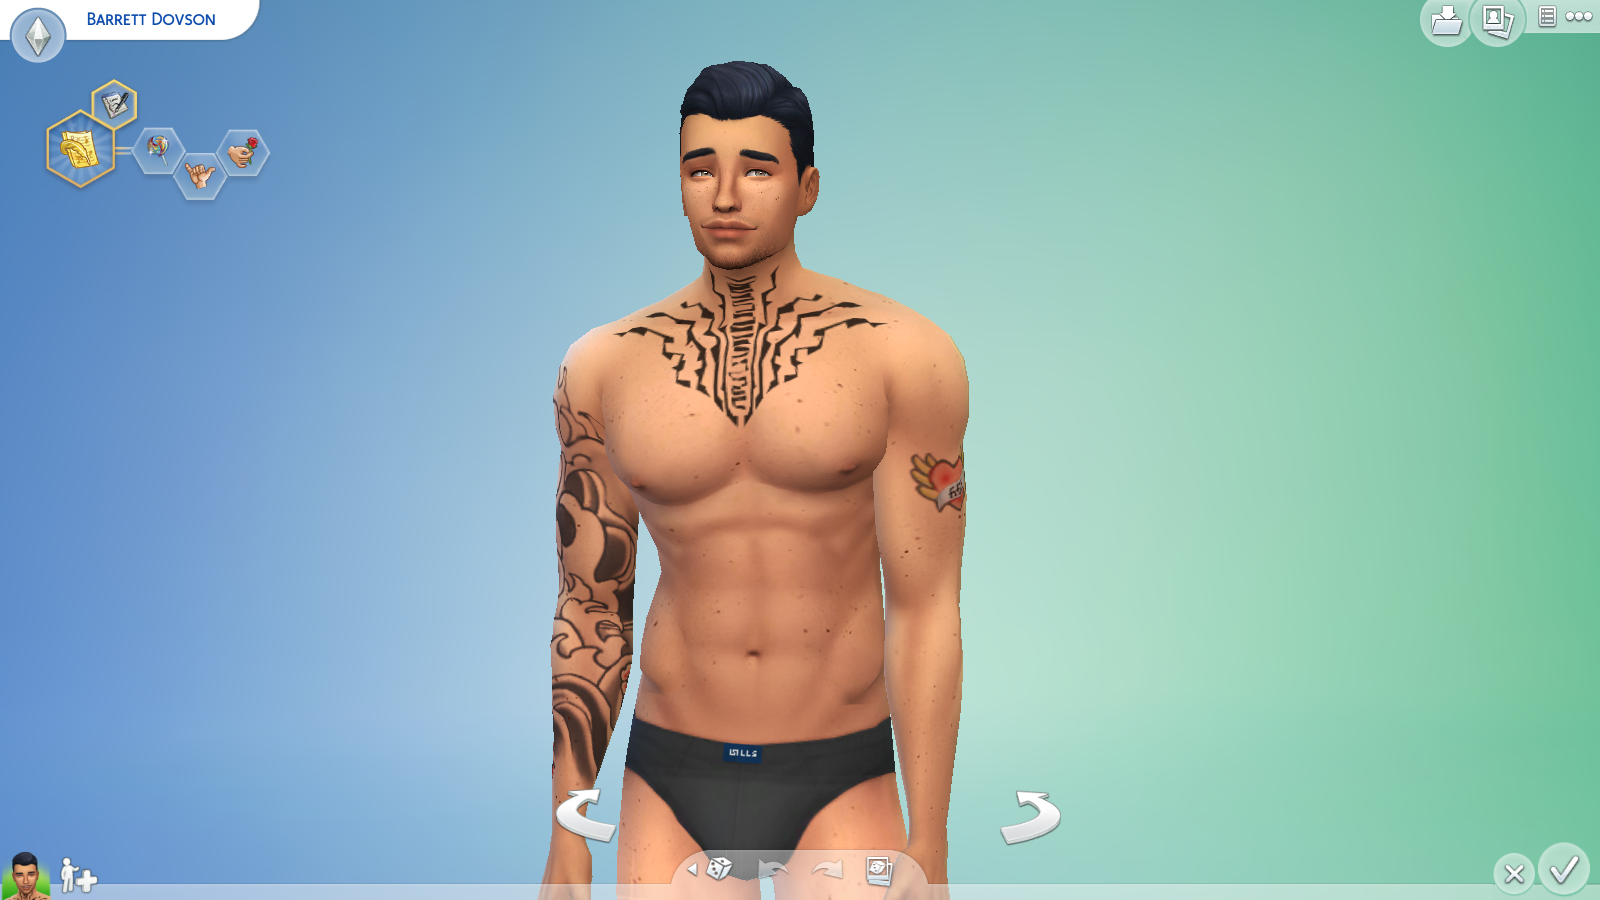 Hot Male Sims The Sims 4 General Discussion Loverslab